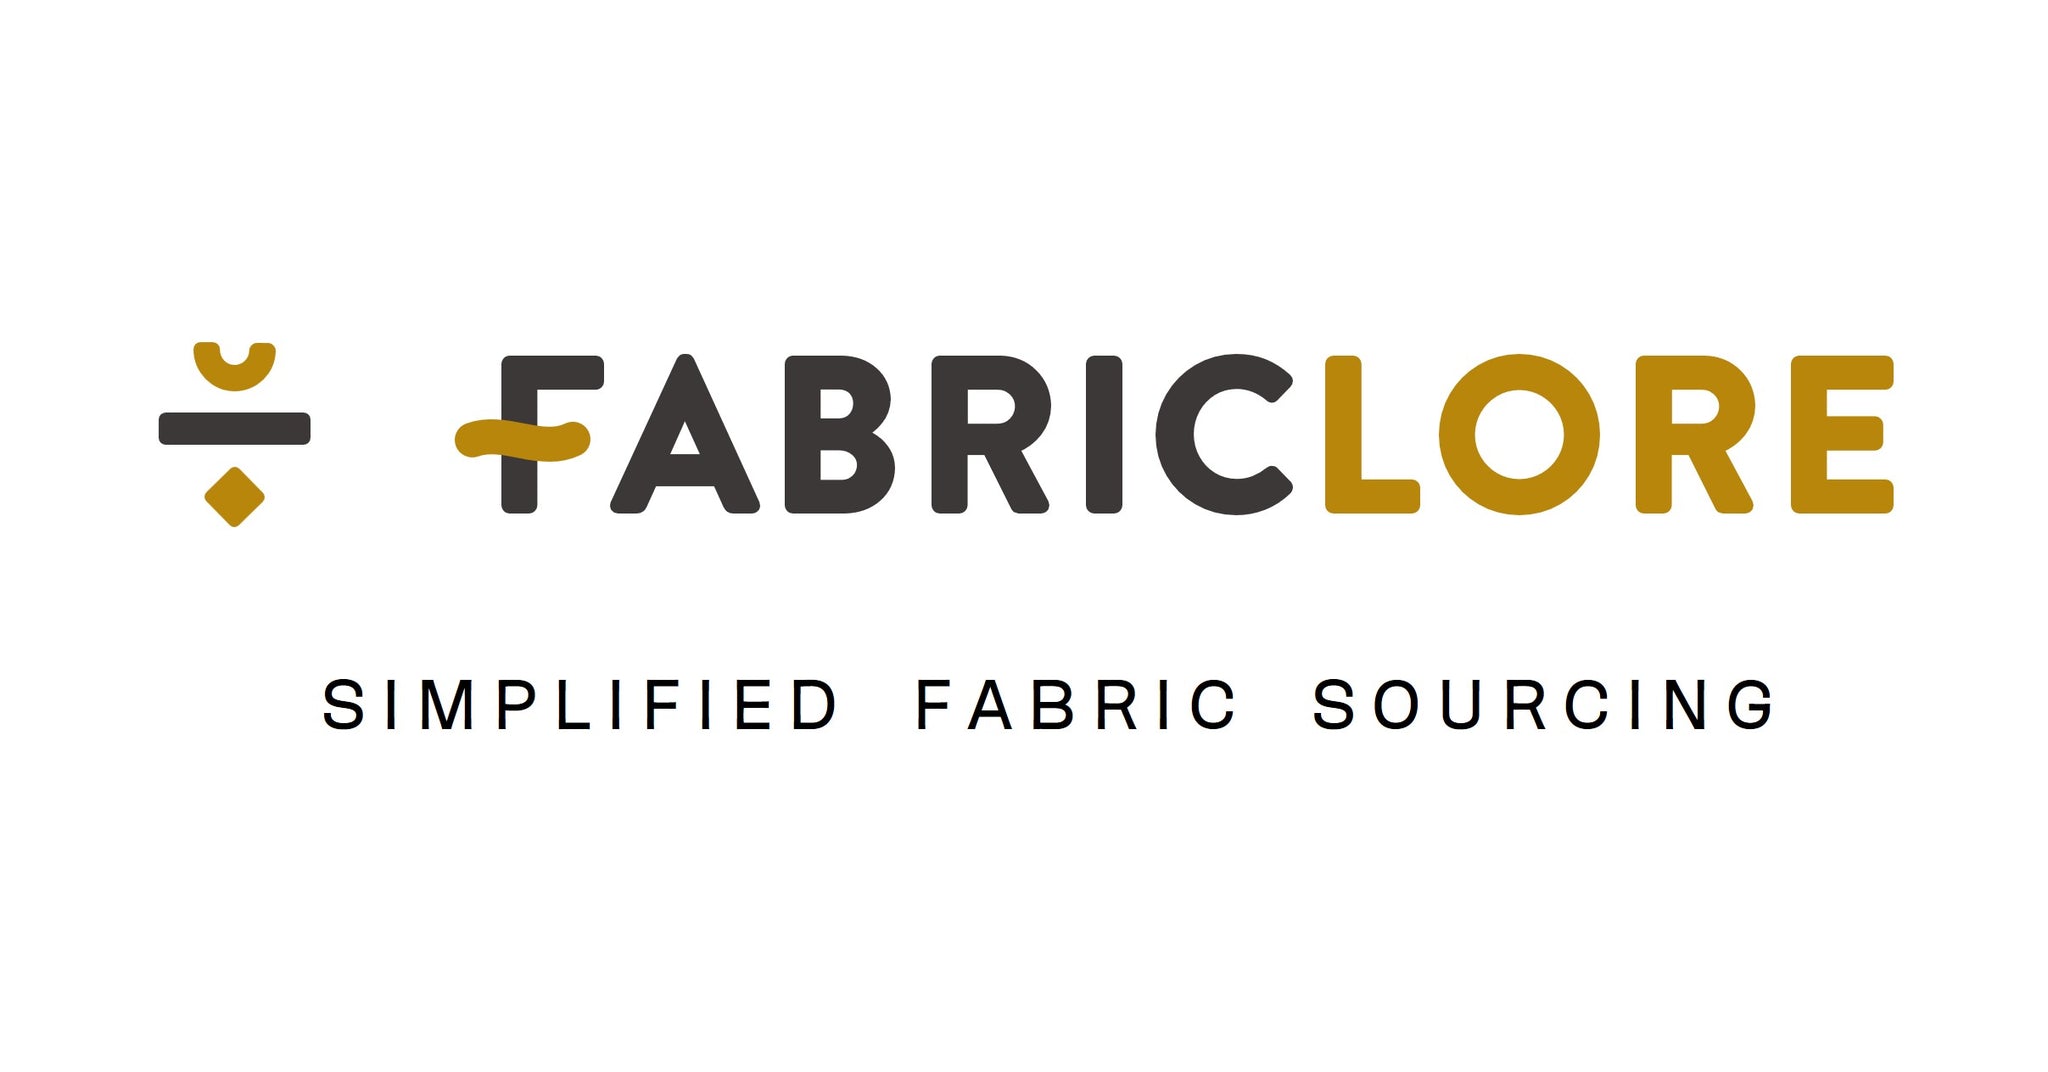 Get the top quality textiles from Fabriclore